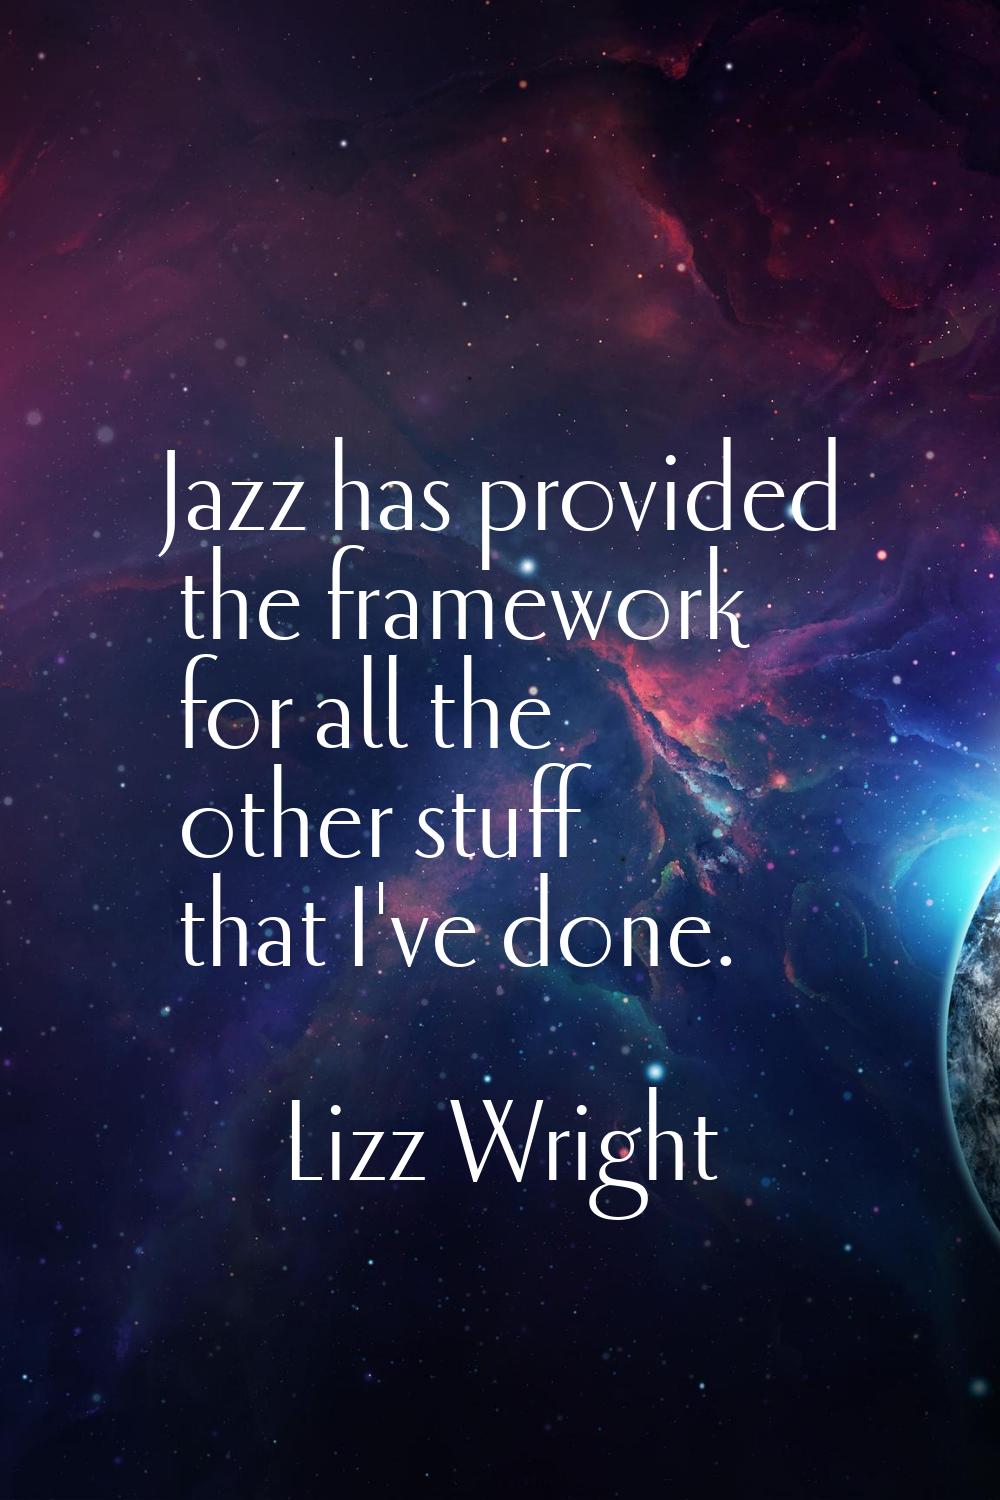 Jazz has provided the framework for all the other stuff that I've done.